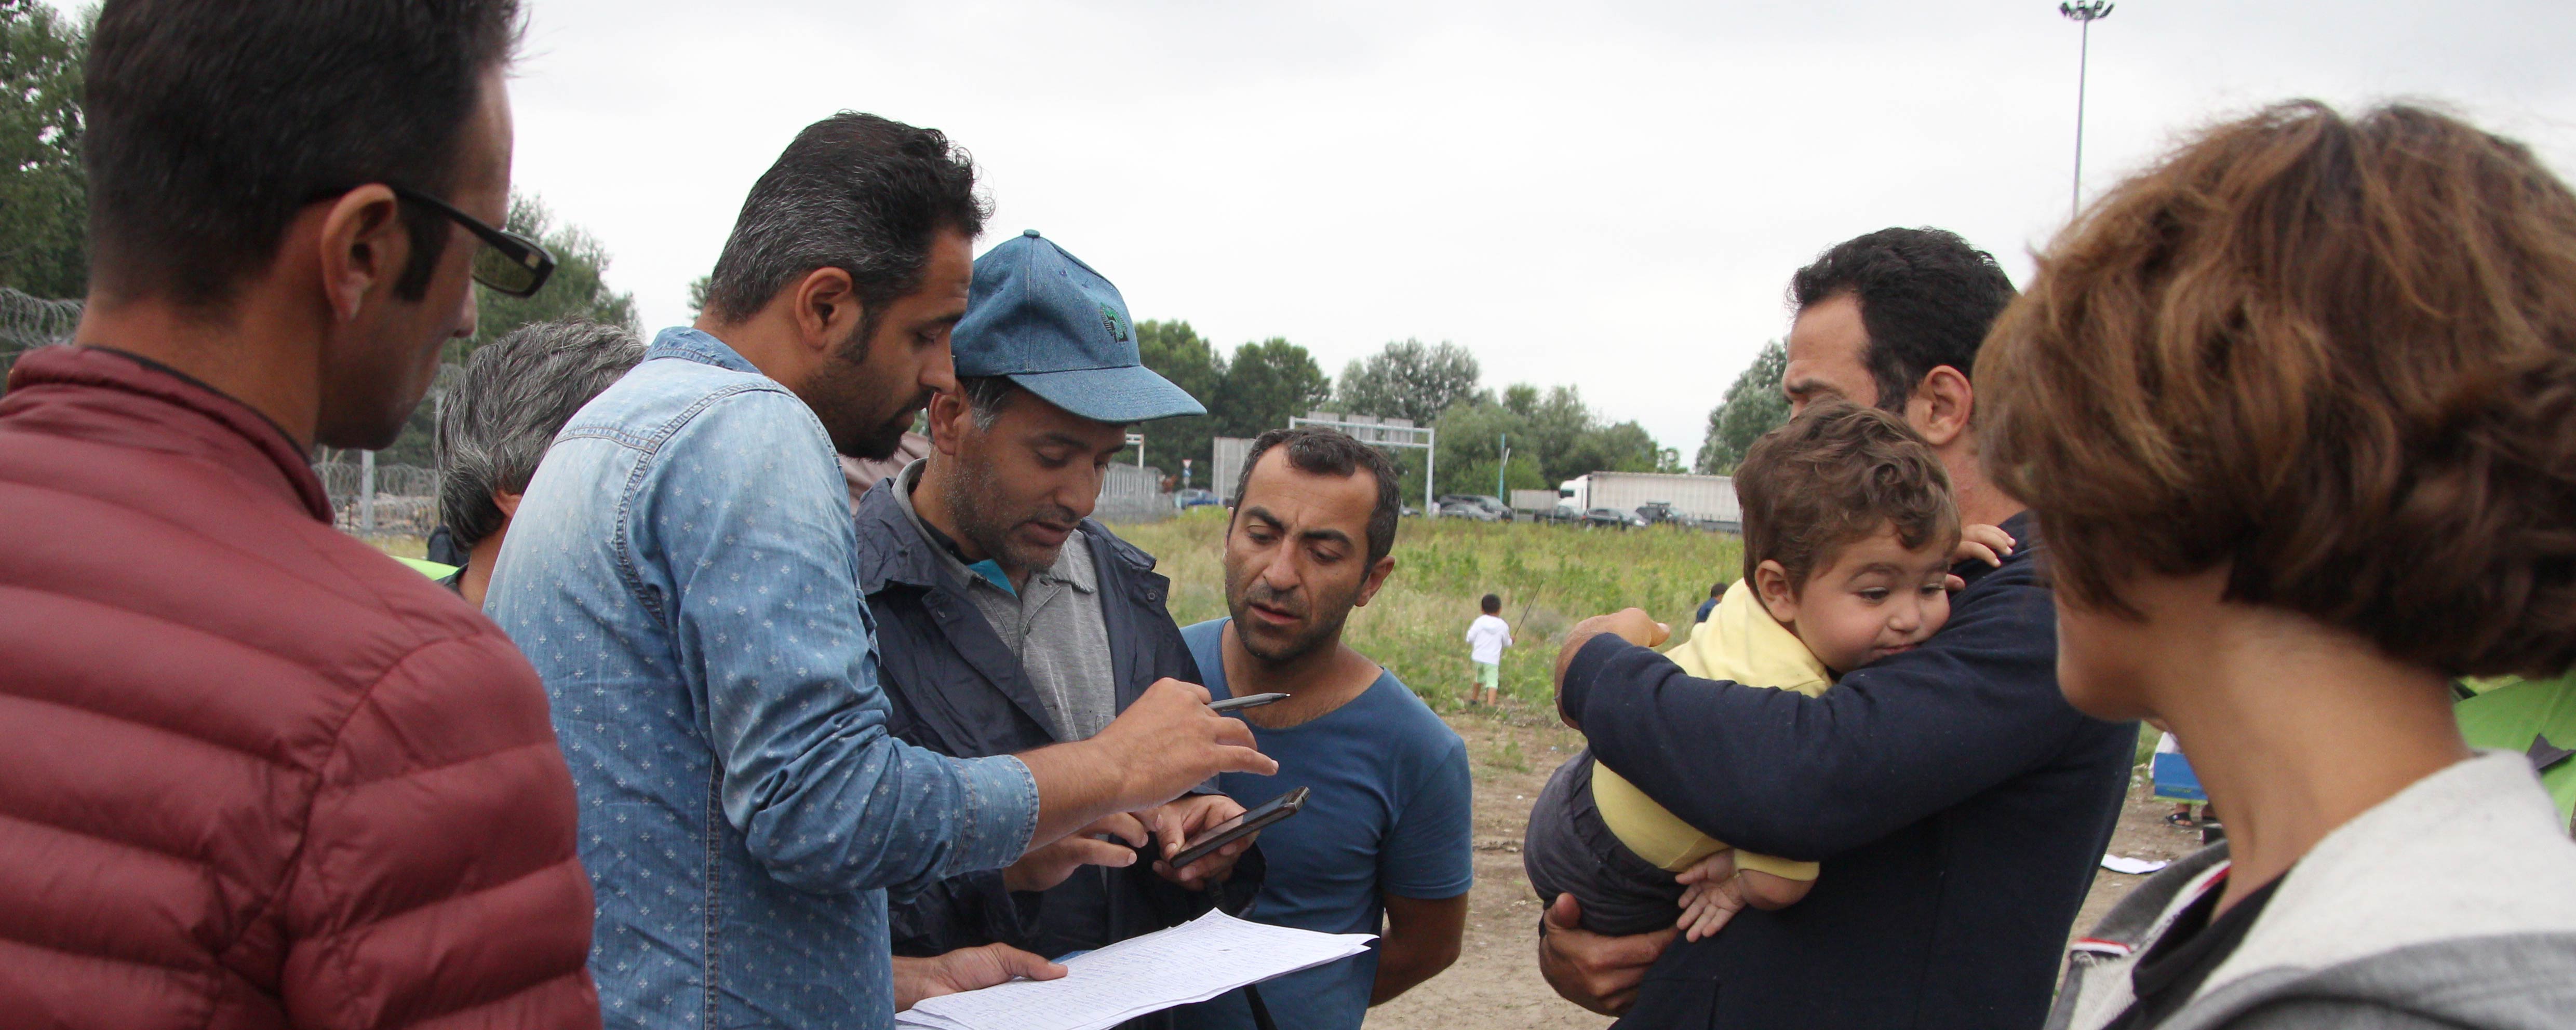 UNHCR calls on Hungary to protect, not persecute, refugees